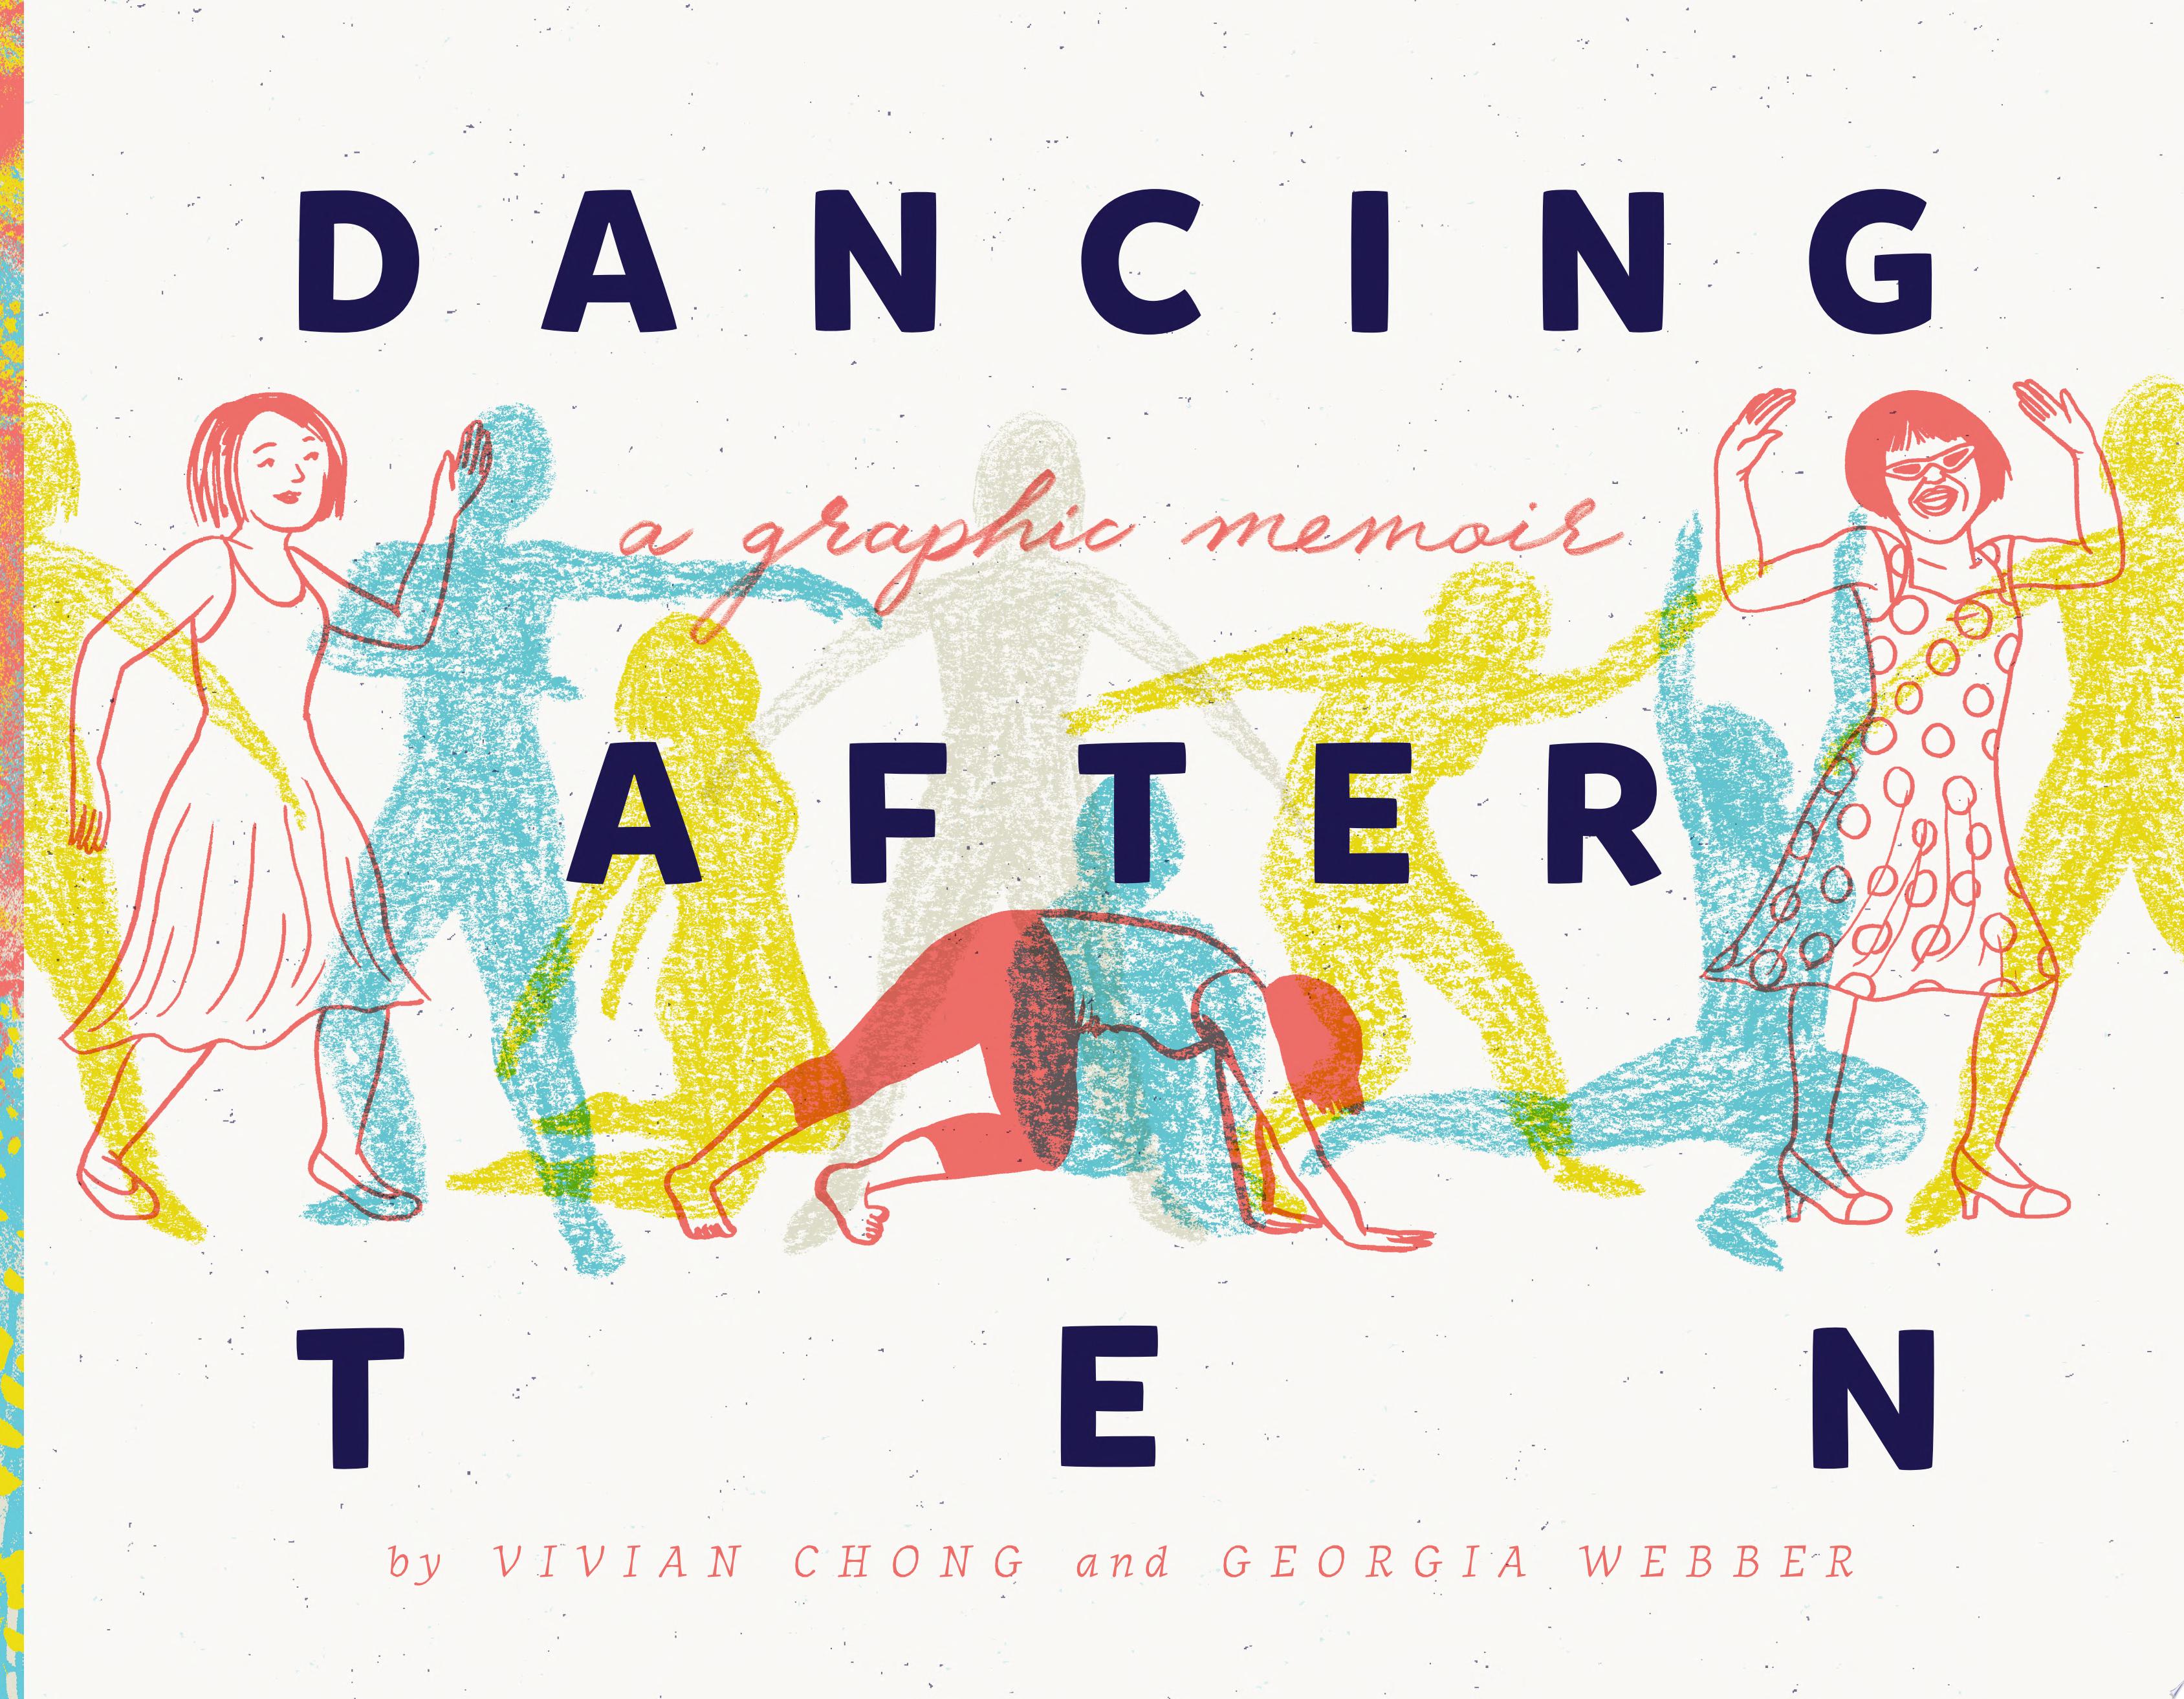 Image for "Dancing after TEN"